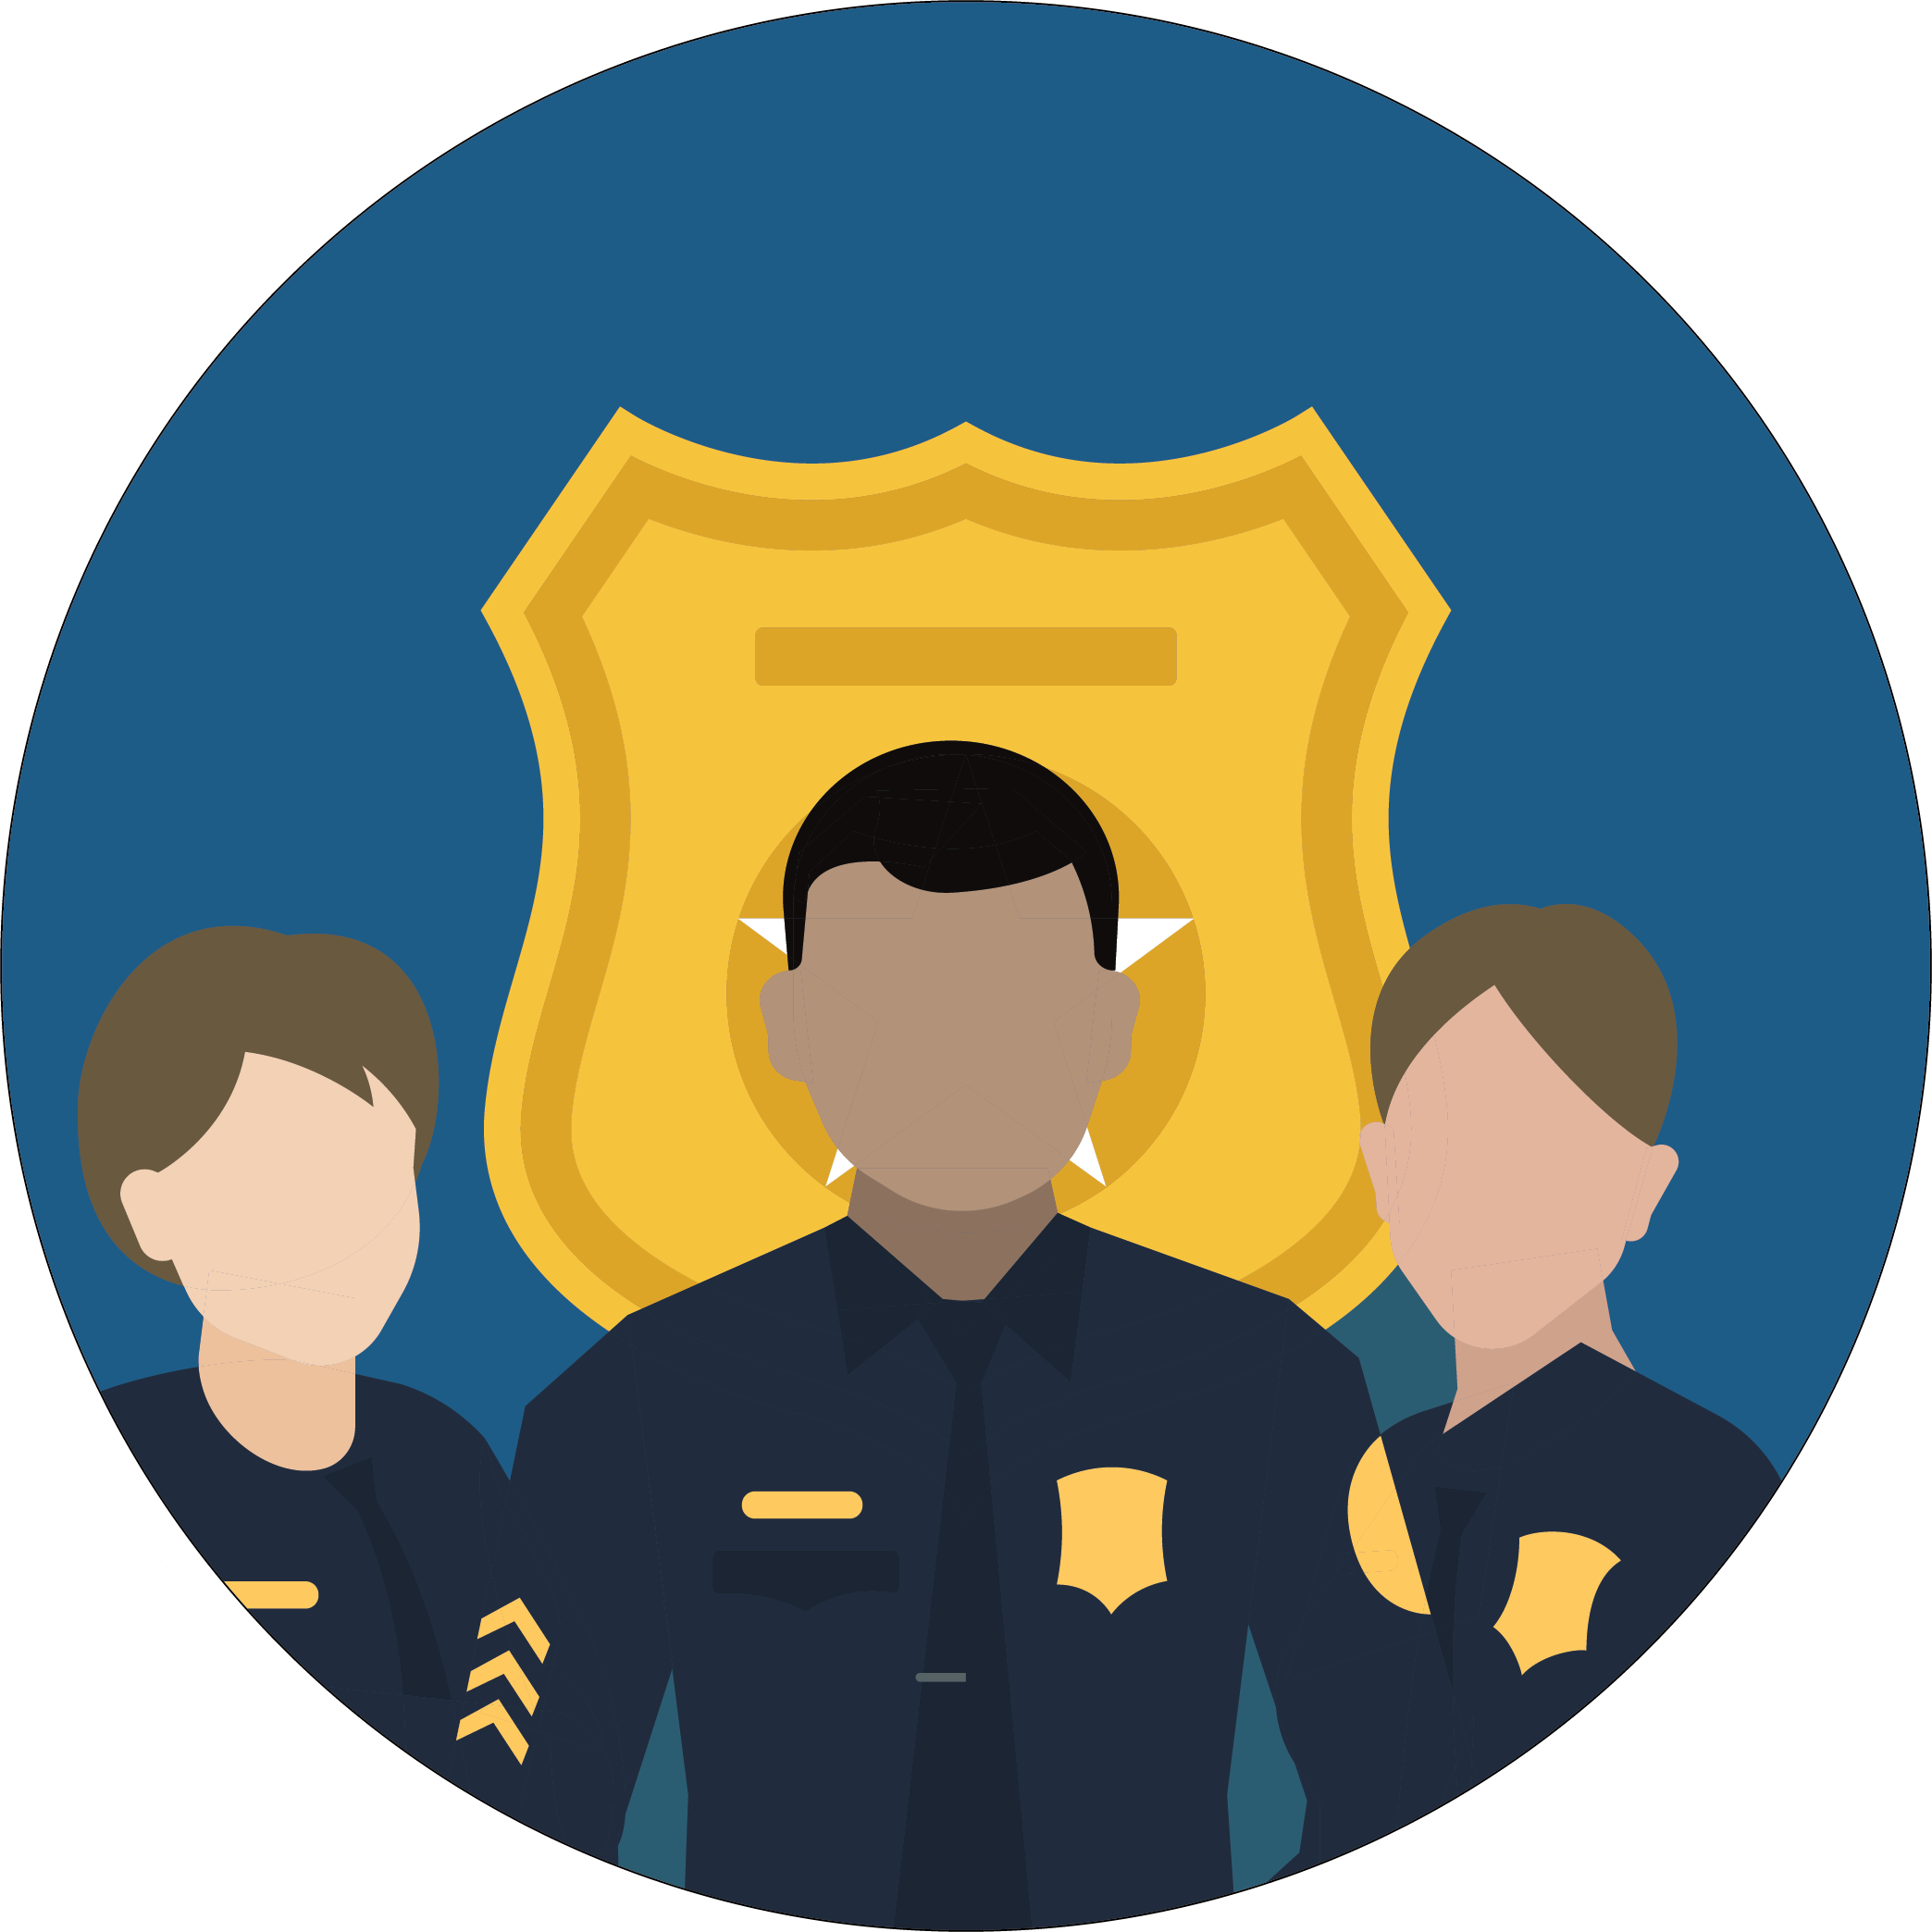 Law enforcement icon showing three figures standing in front of a badge